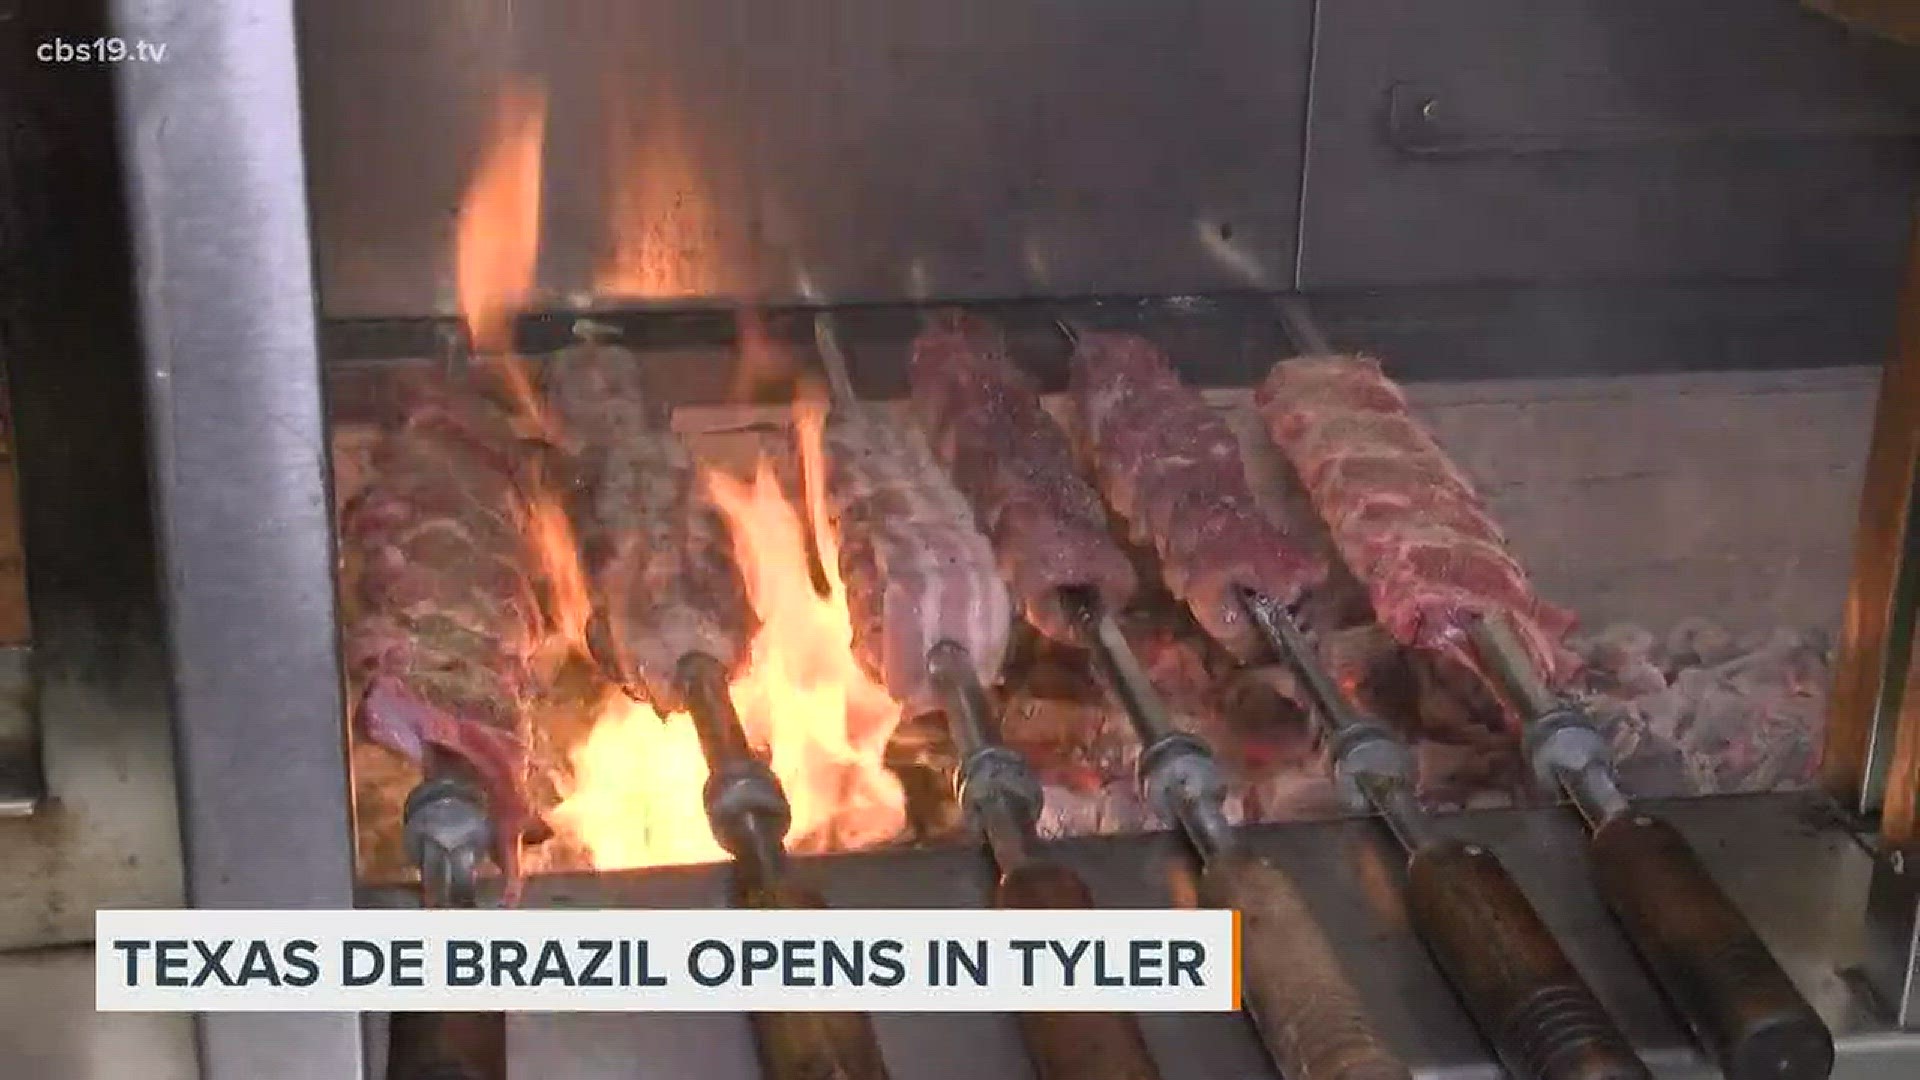 Imagine being able to travel to South America without ever leaving East Texas. Believe it or not, it's possible for your taste buds. We got an inside look at what makes Texas de Brazil in Tyler so unique!